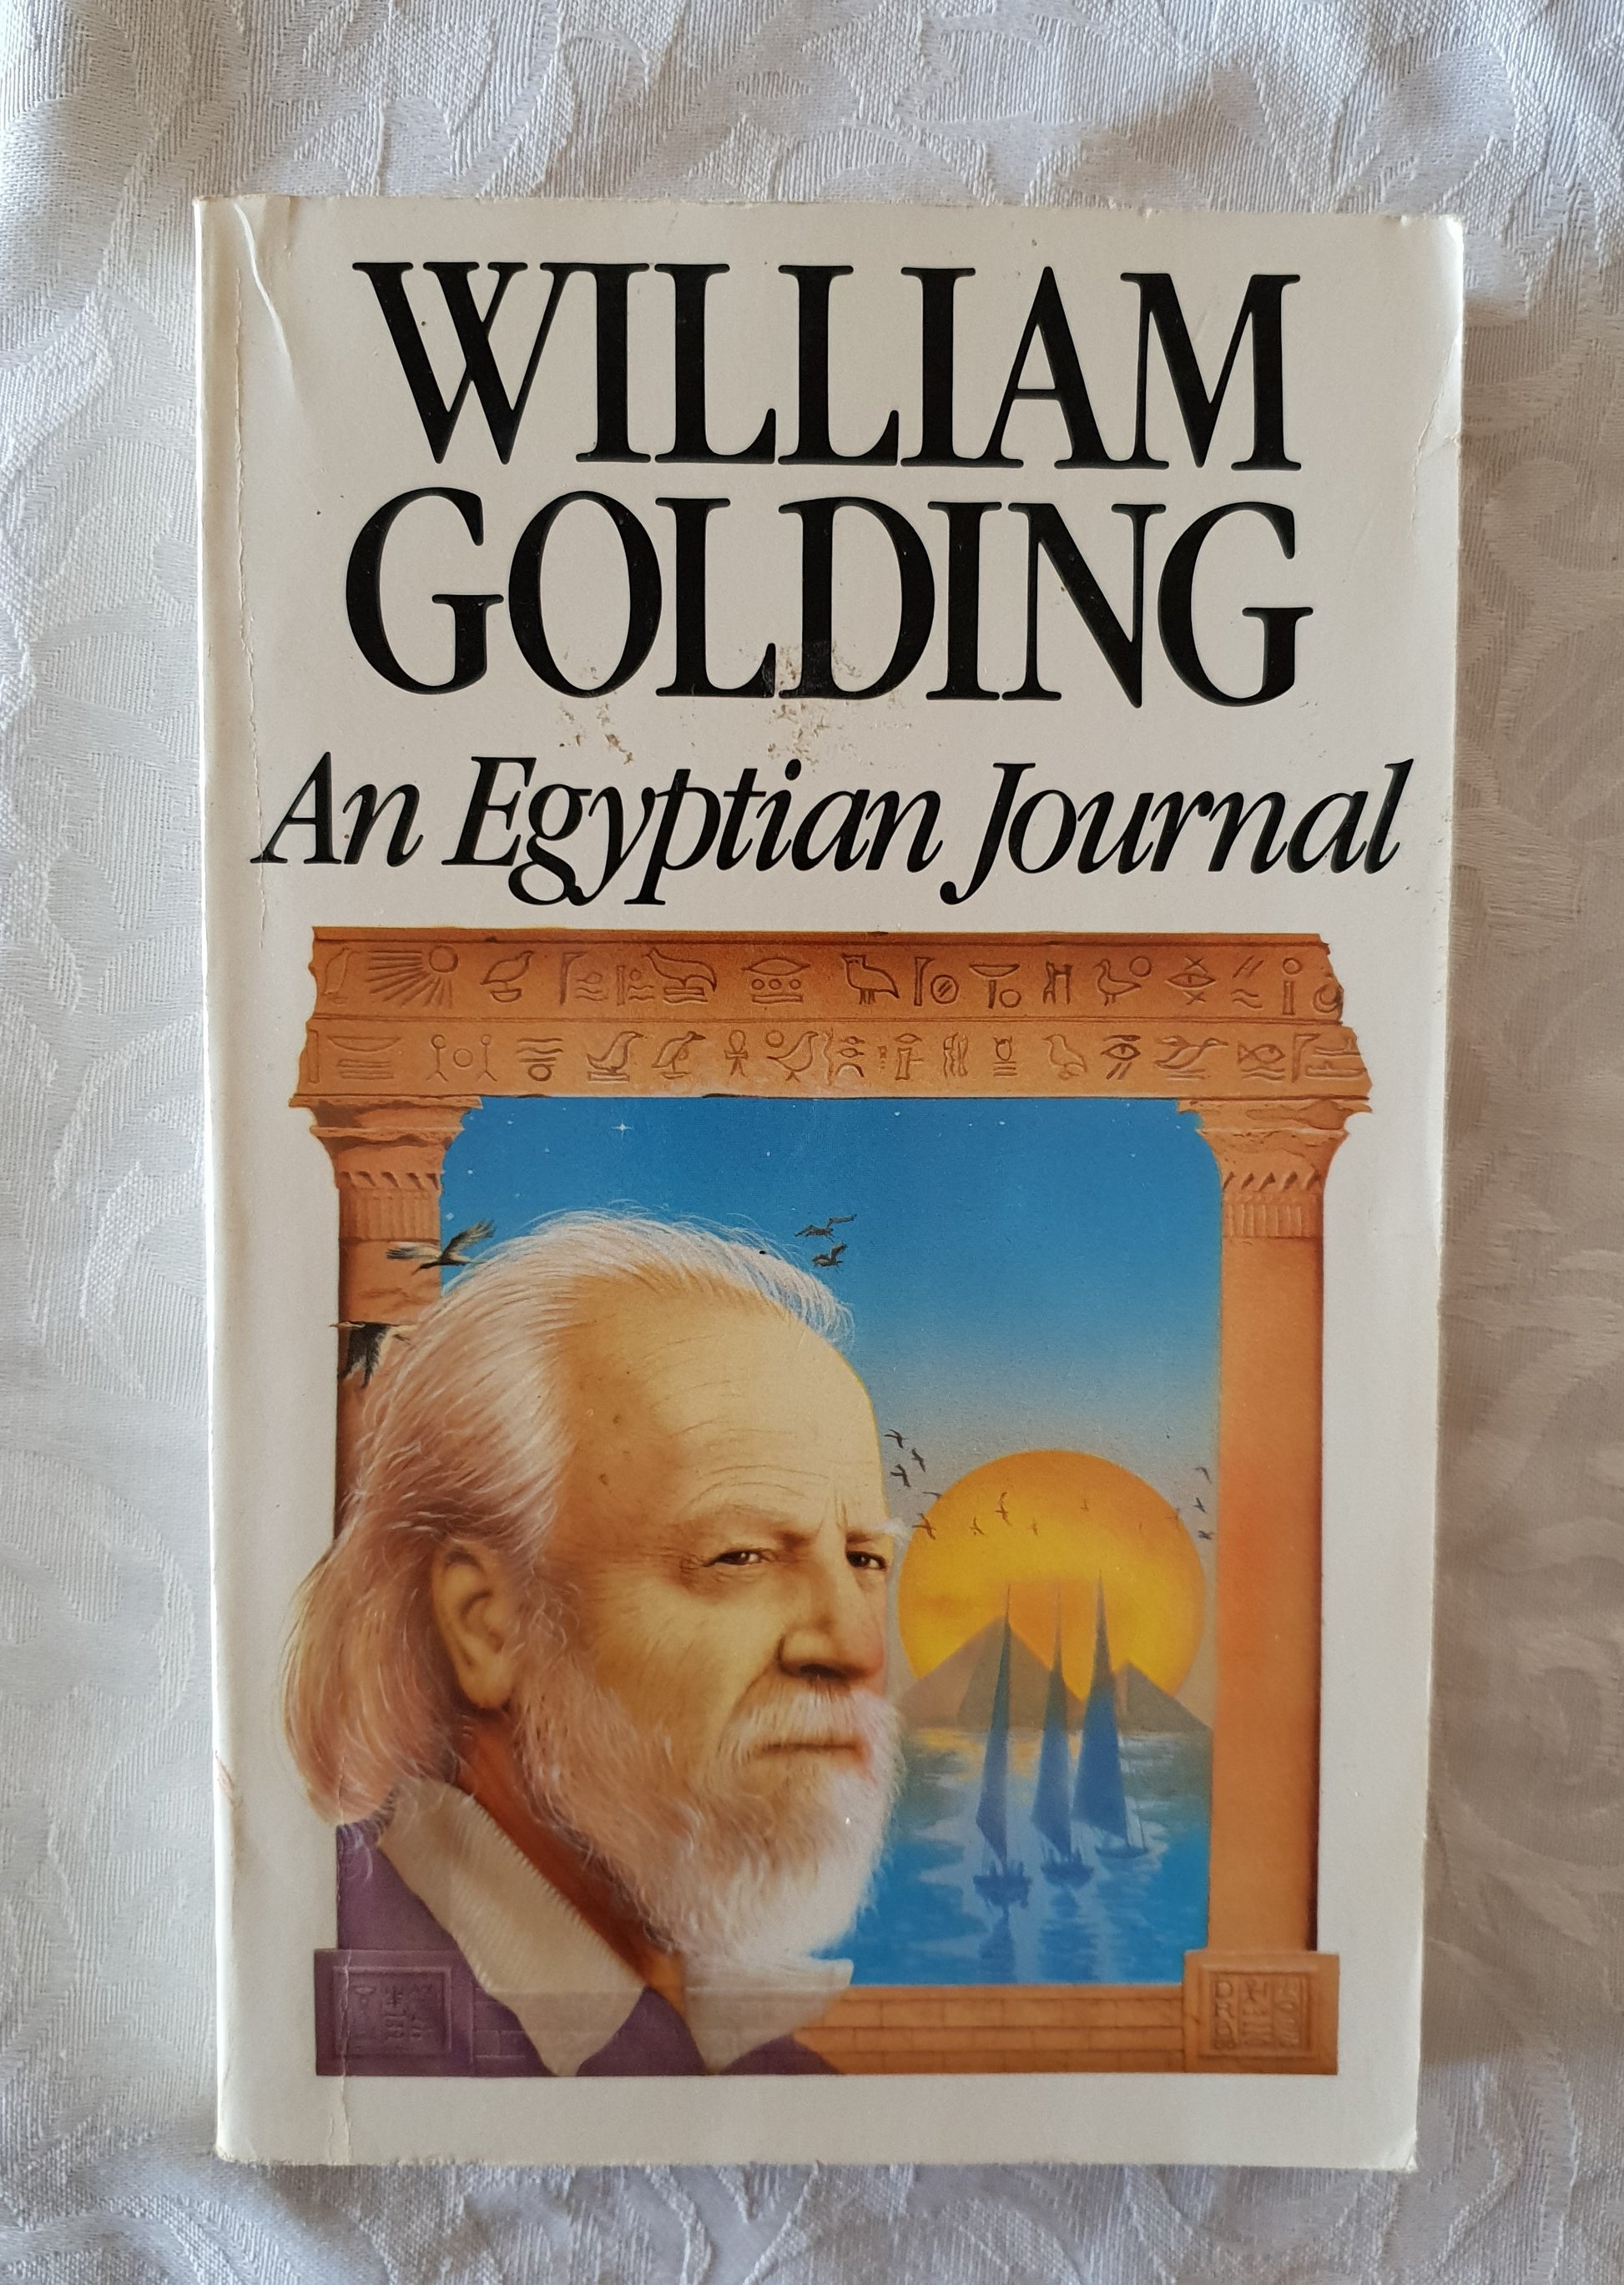 An Egyptian Journal  by William Golding